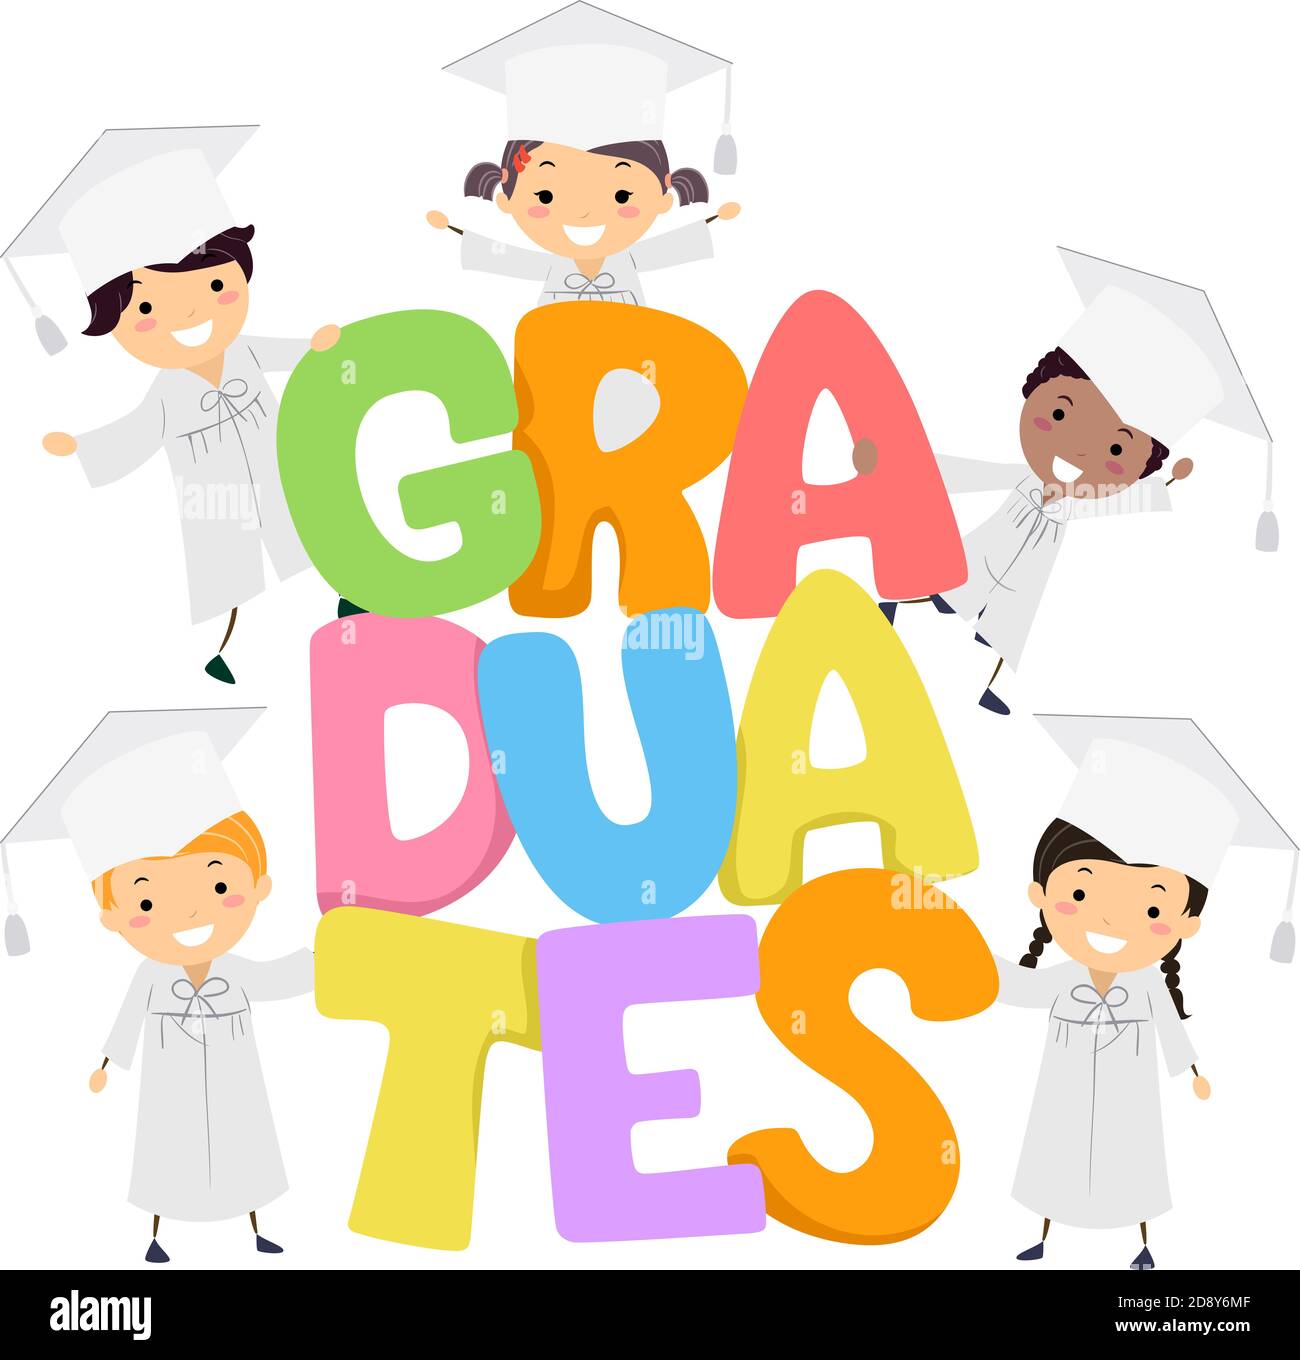 Illustration of Stickman Kids Students in Graduation Caps and Gown with Graduates Lettering Stock Photo